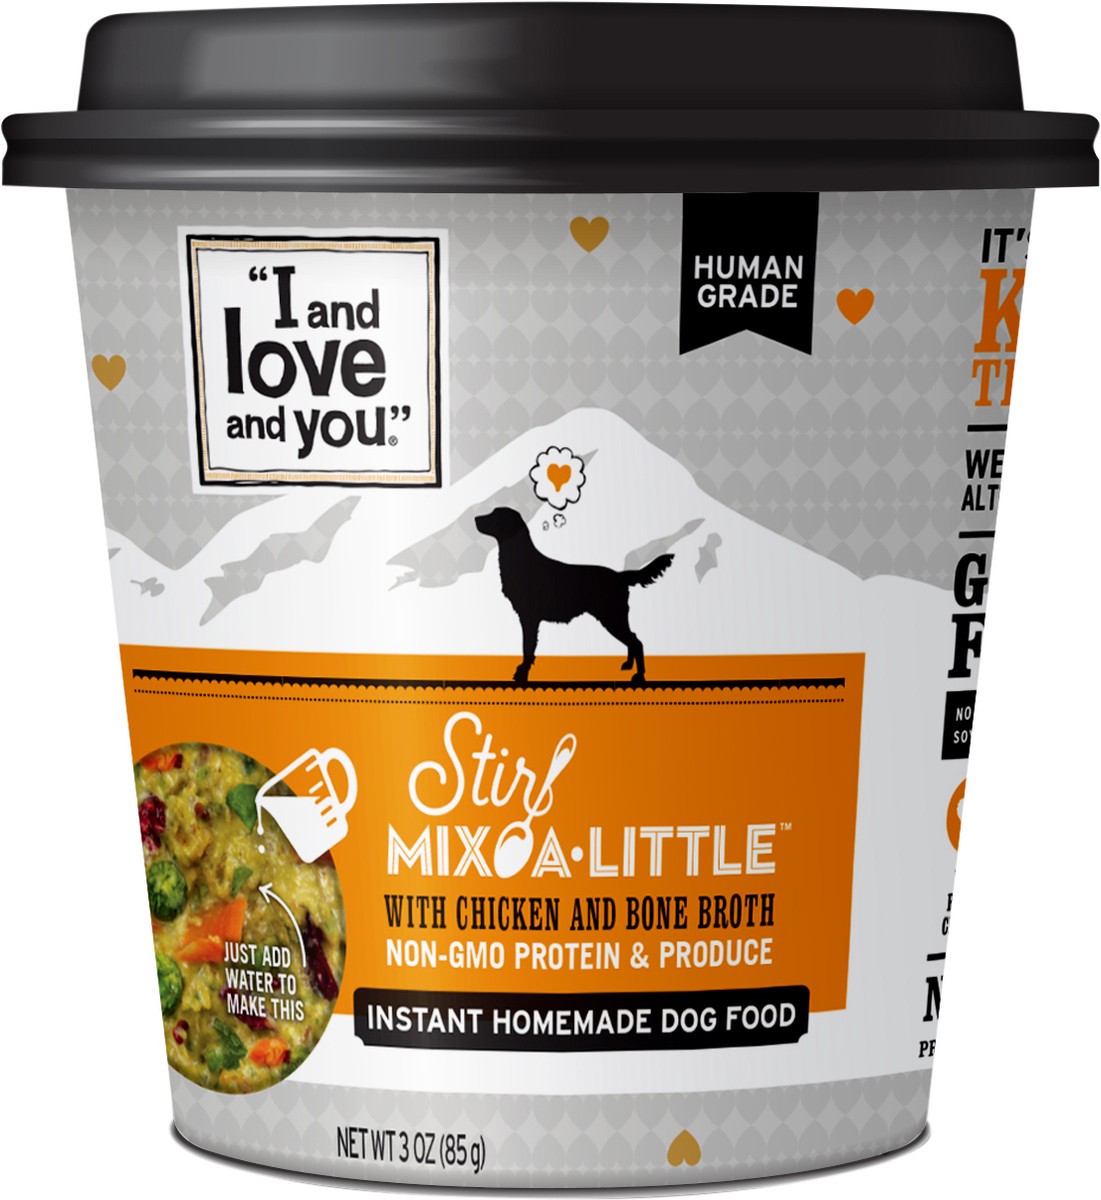 slide 2 of 2, I and Love and You Stir Mix-A-Little with Chicken and Bone Broth Dog Food 3 oz, 3 oz